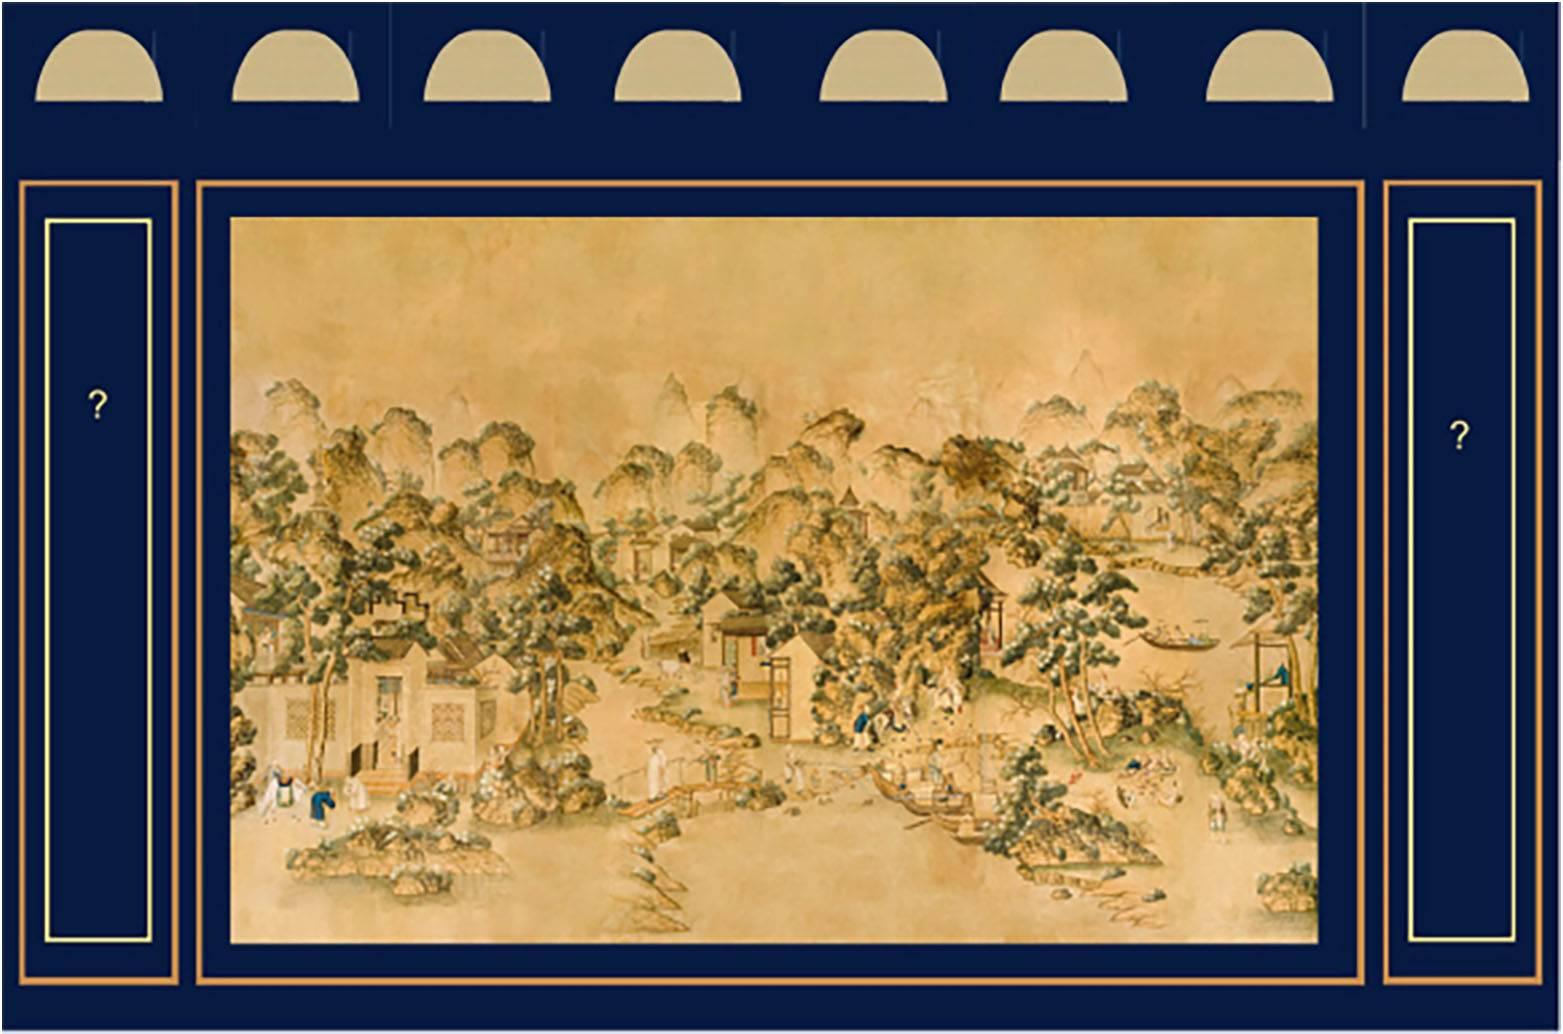 Sample of our Chinese Export Wall Paper 2